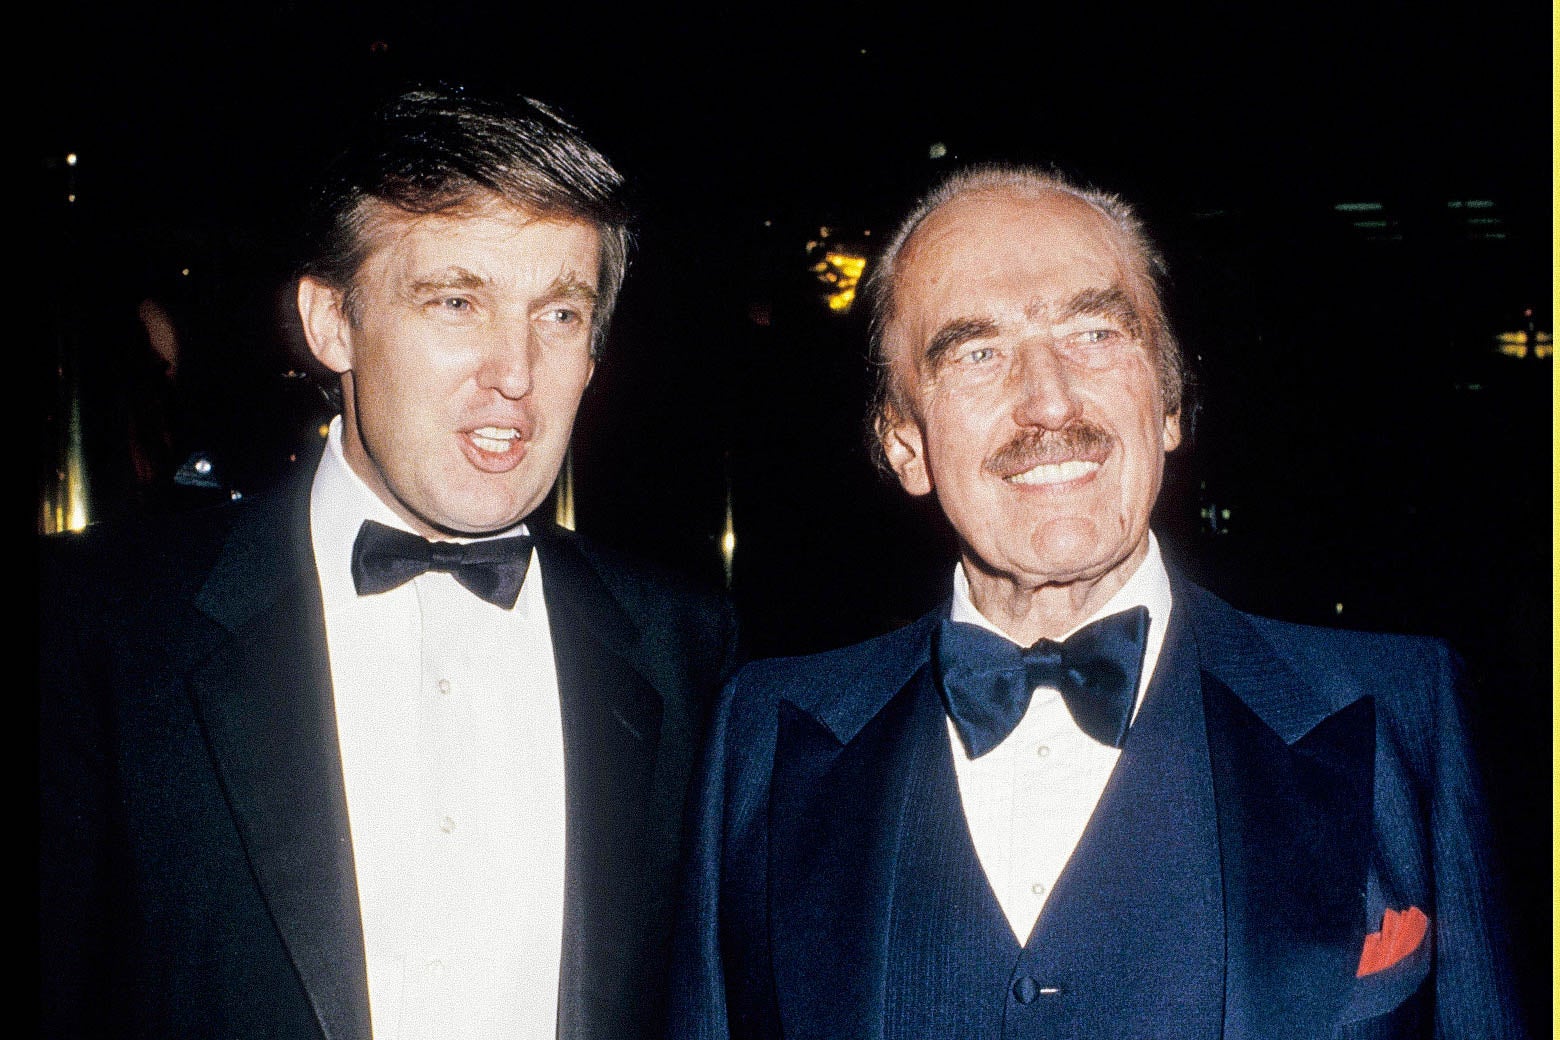 Donald Trump and Fred Trump during an undated celebration for The Art of The Deal.